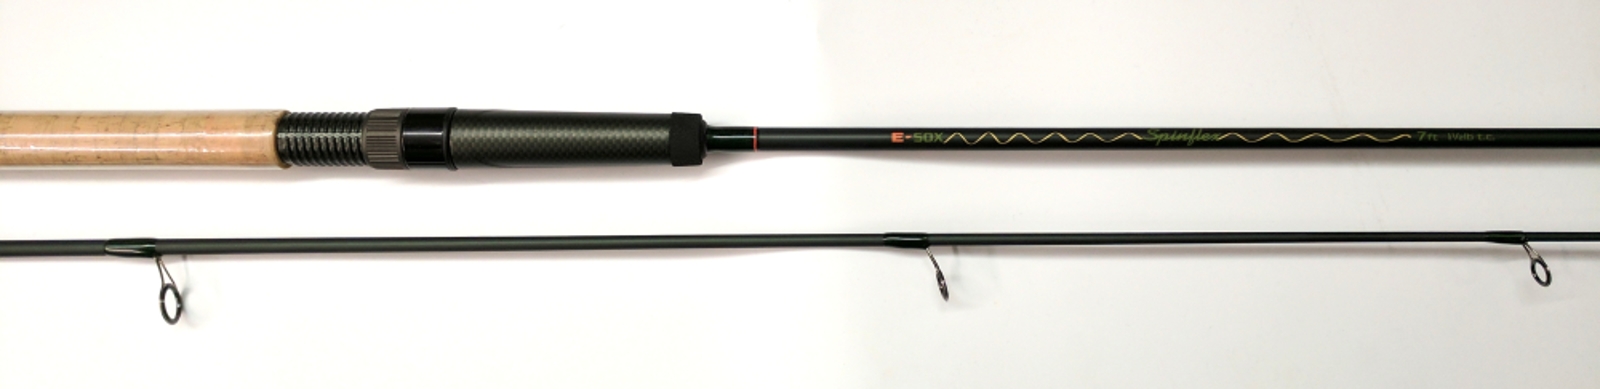 Drennan E-Sox Spinflex Pike Fishing Rods All Sizes!: 8ft ...